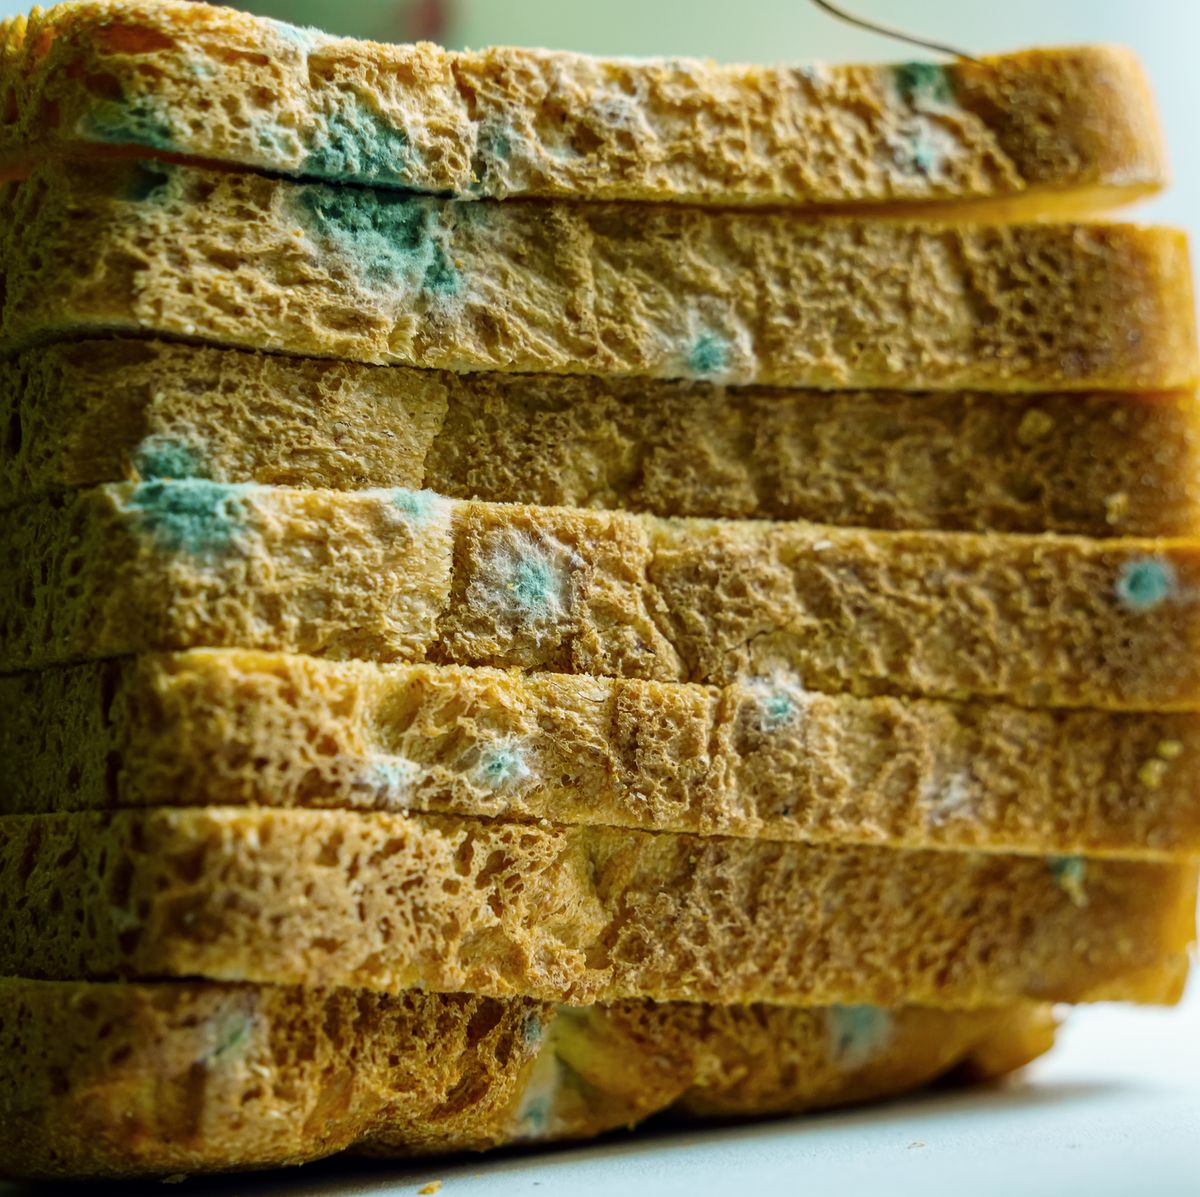 What Moldy Food Is It OK to Eat?